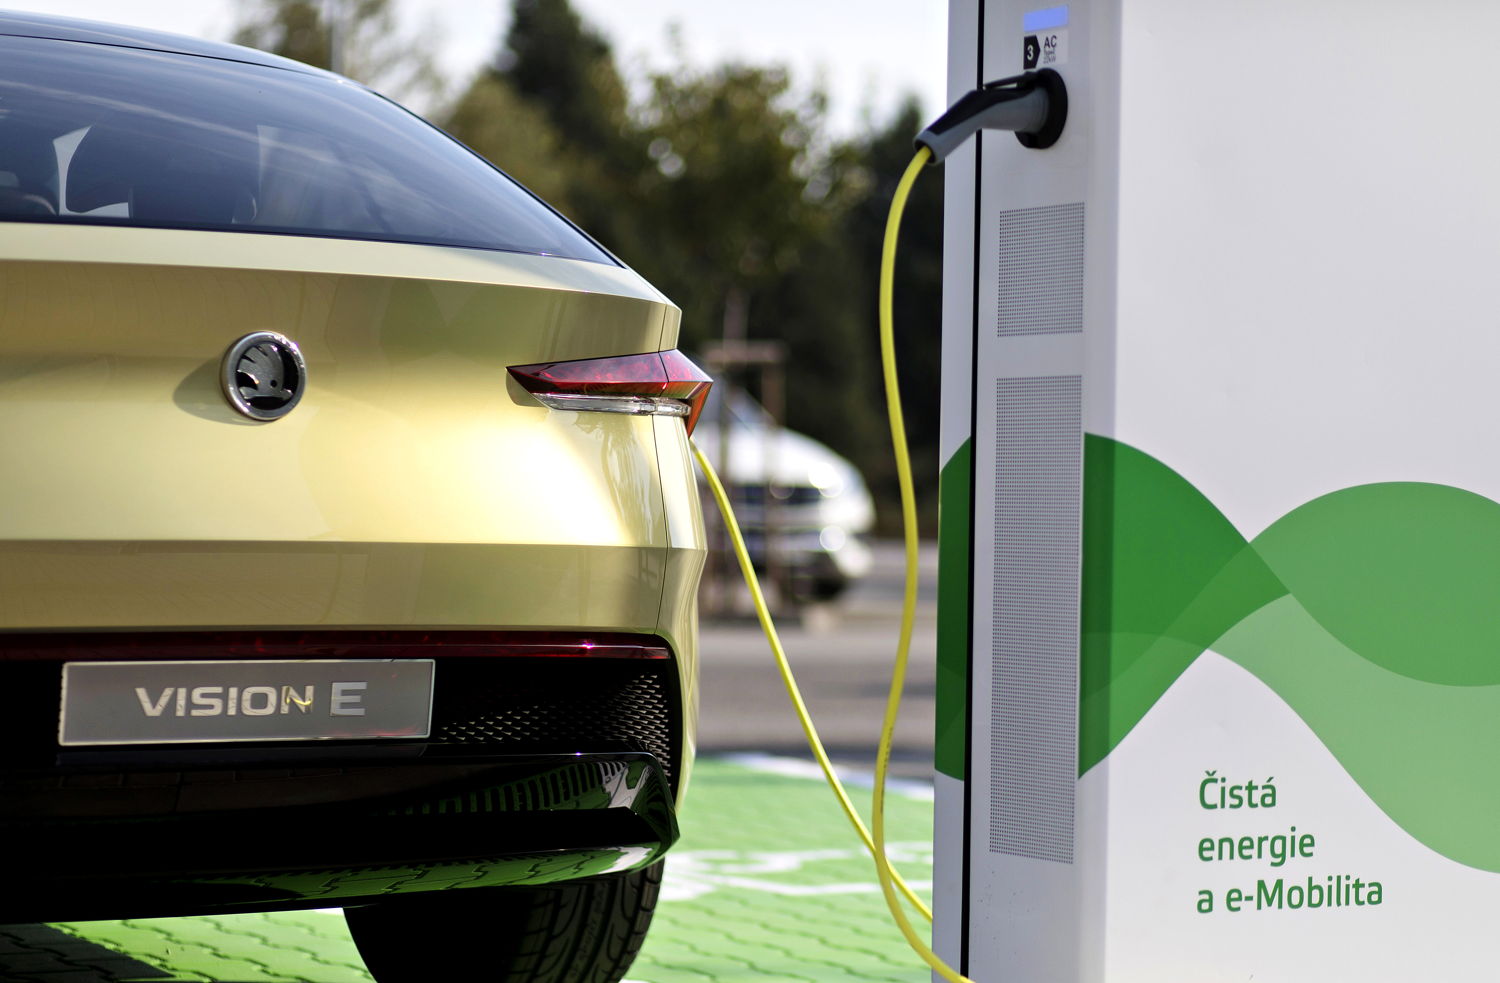 In 2018, the Czech car manufacturer invested 3.4 million euros into expanding its internal electrical infrastructure at the company headquarters in Mladá Boleslav - 1.65 million of which into the power grid and 1.75 million into the construction of charging stations.